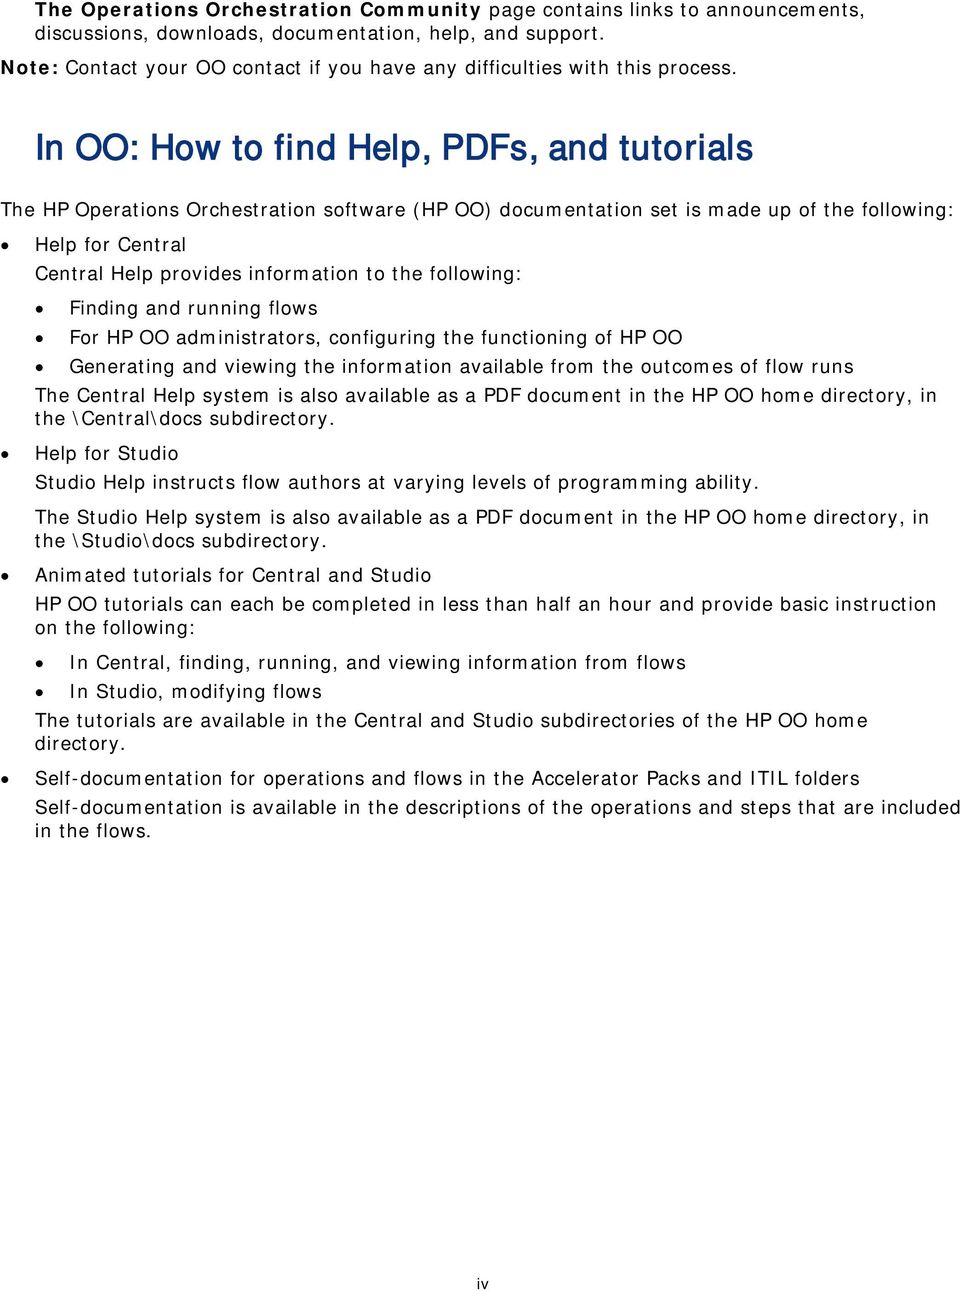 In OO: How to find Help, PDFs, and tutorials The HP Operations Orchestration software (HP OO) documentation set is made up of the following: Help for Central Central Help provides information to the